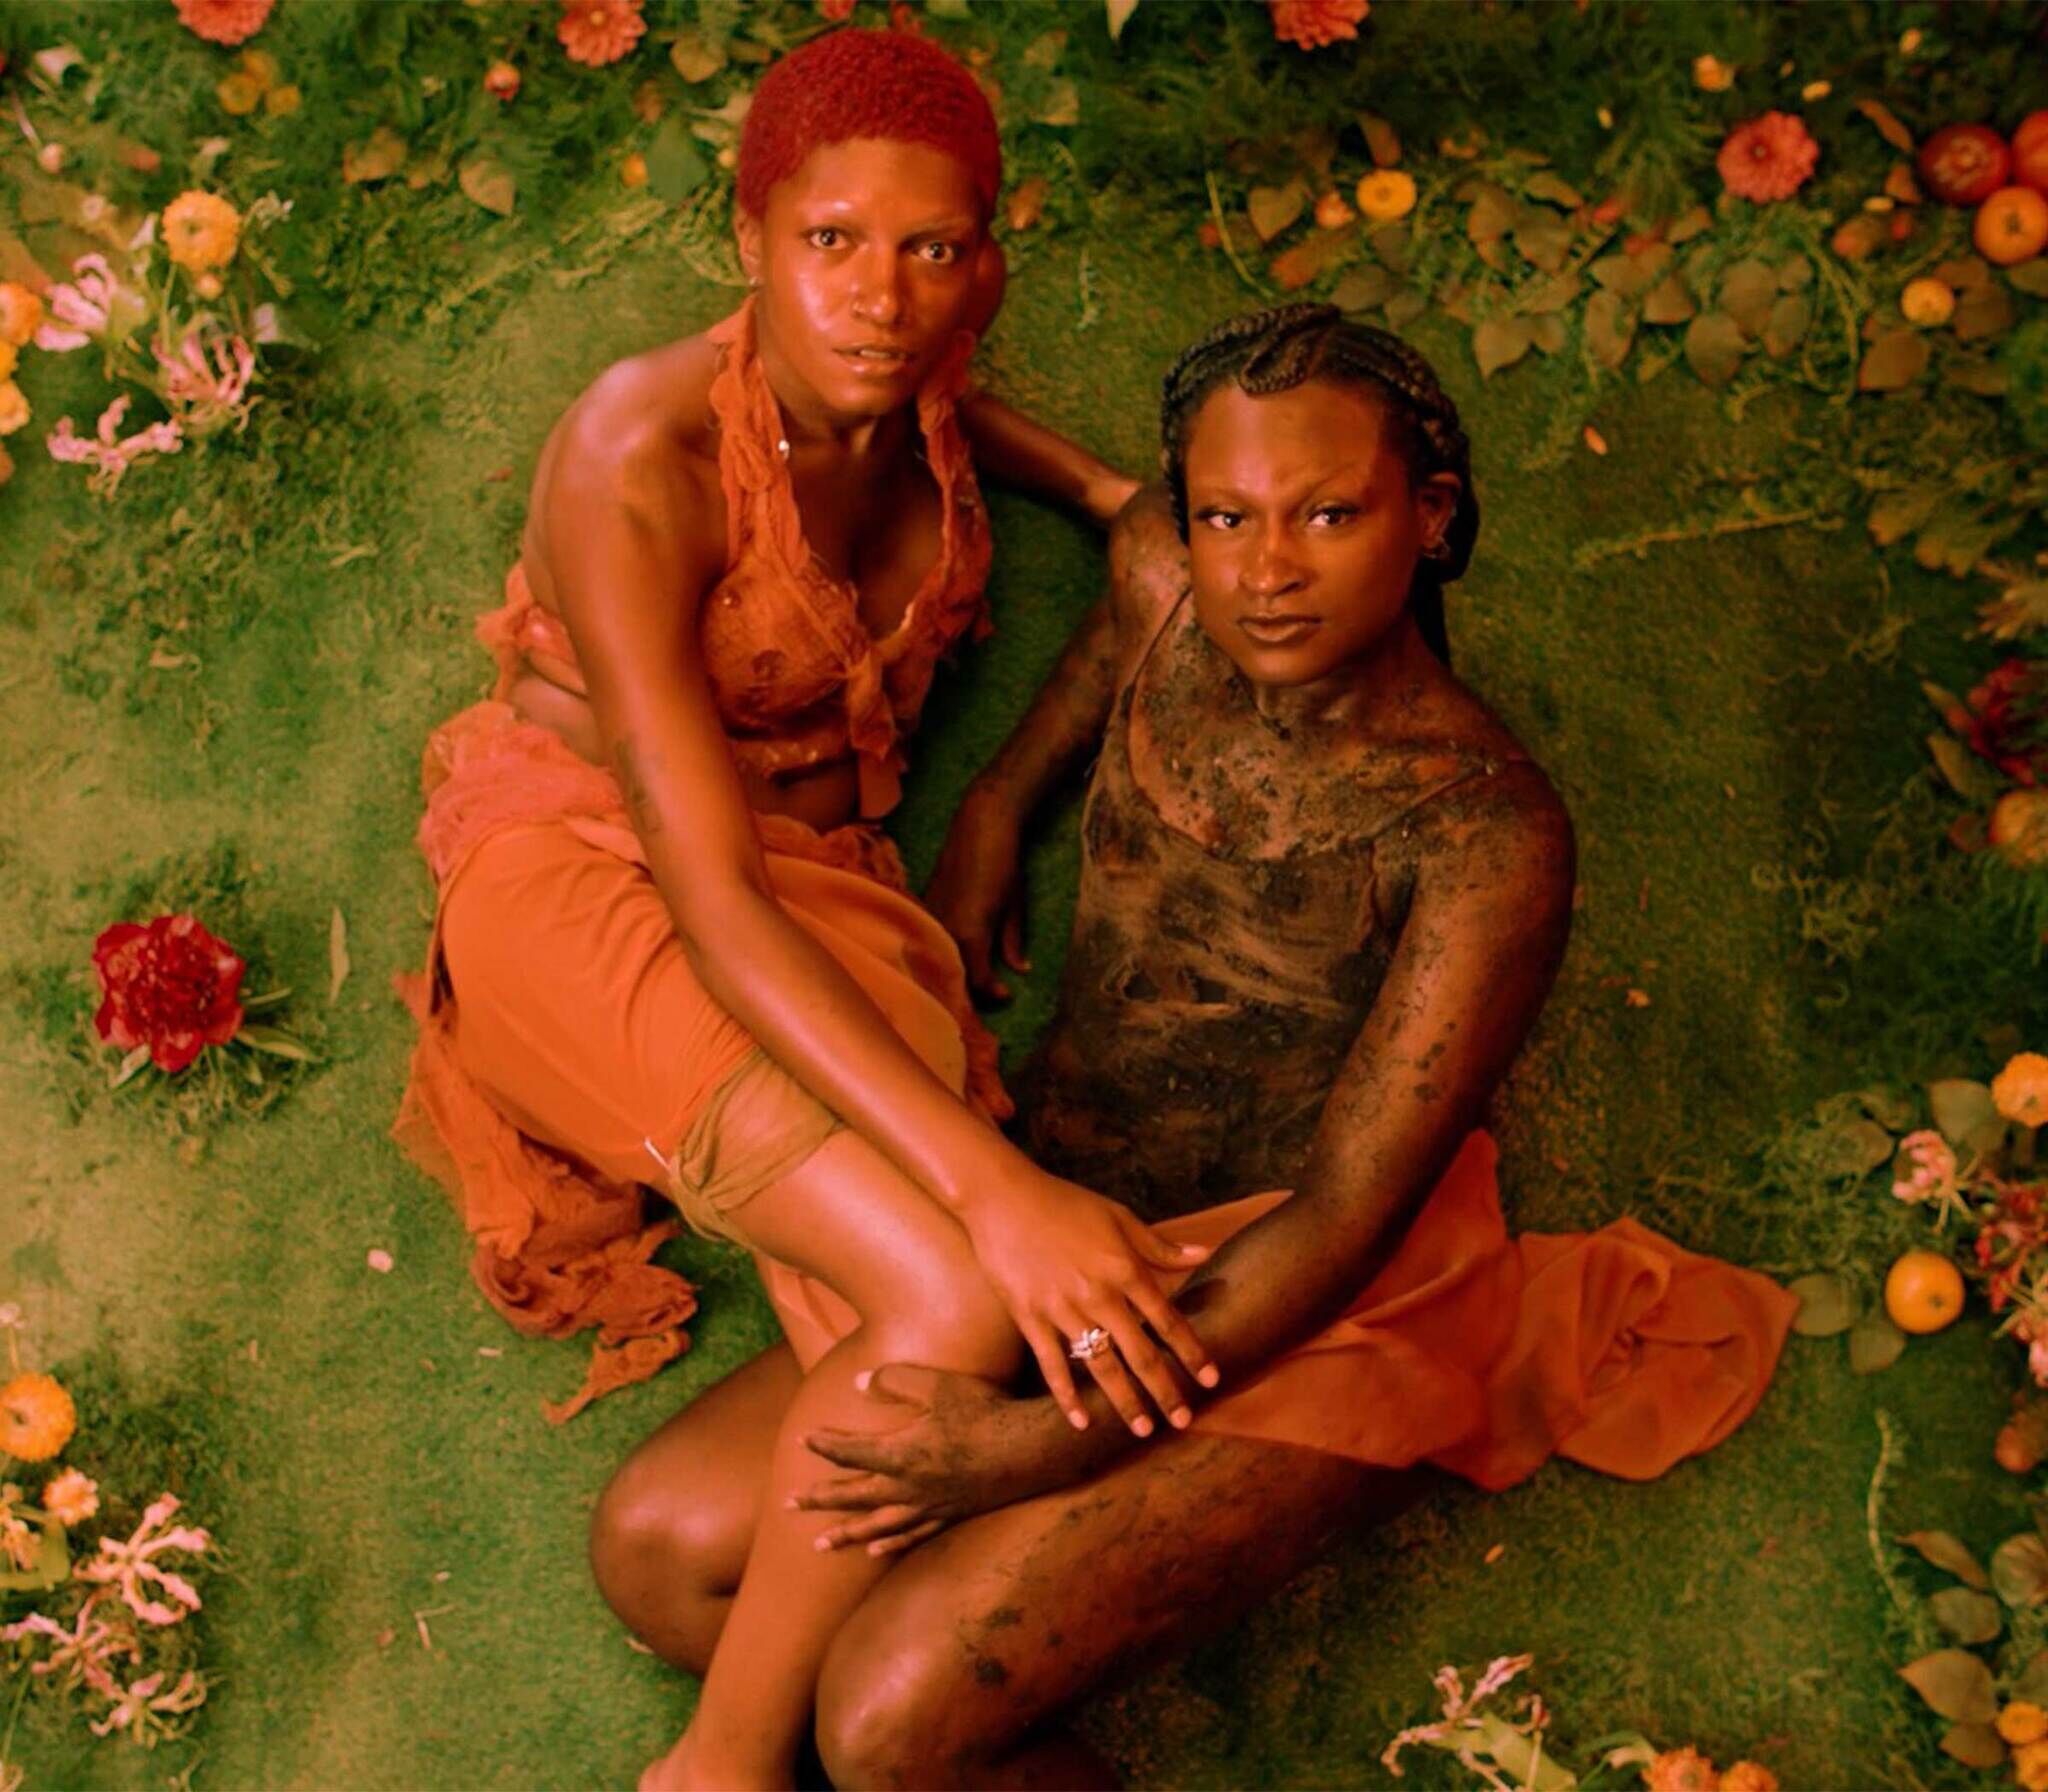 Two individuals with striking poses surrounded by lush greenery and vibrant flowers.